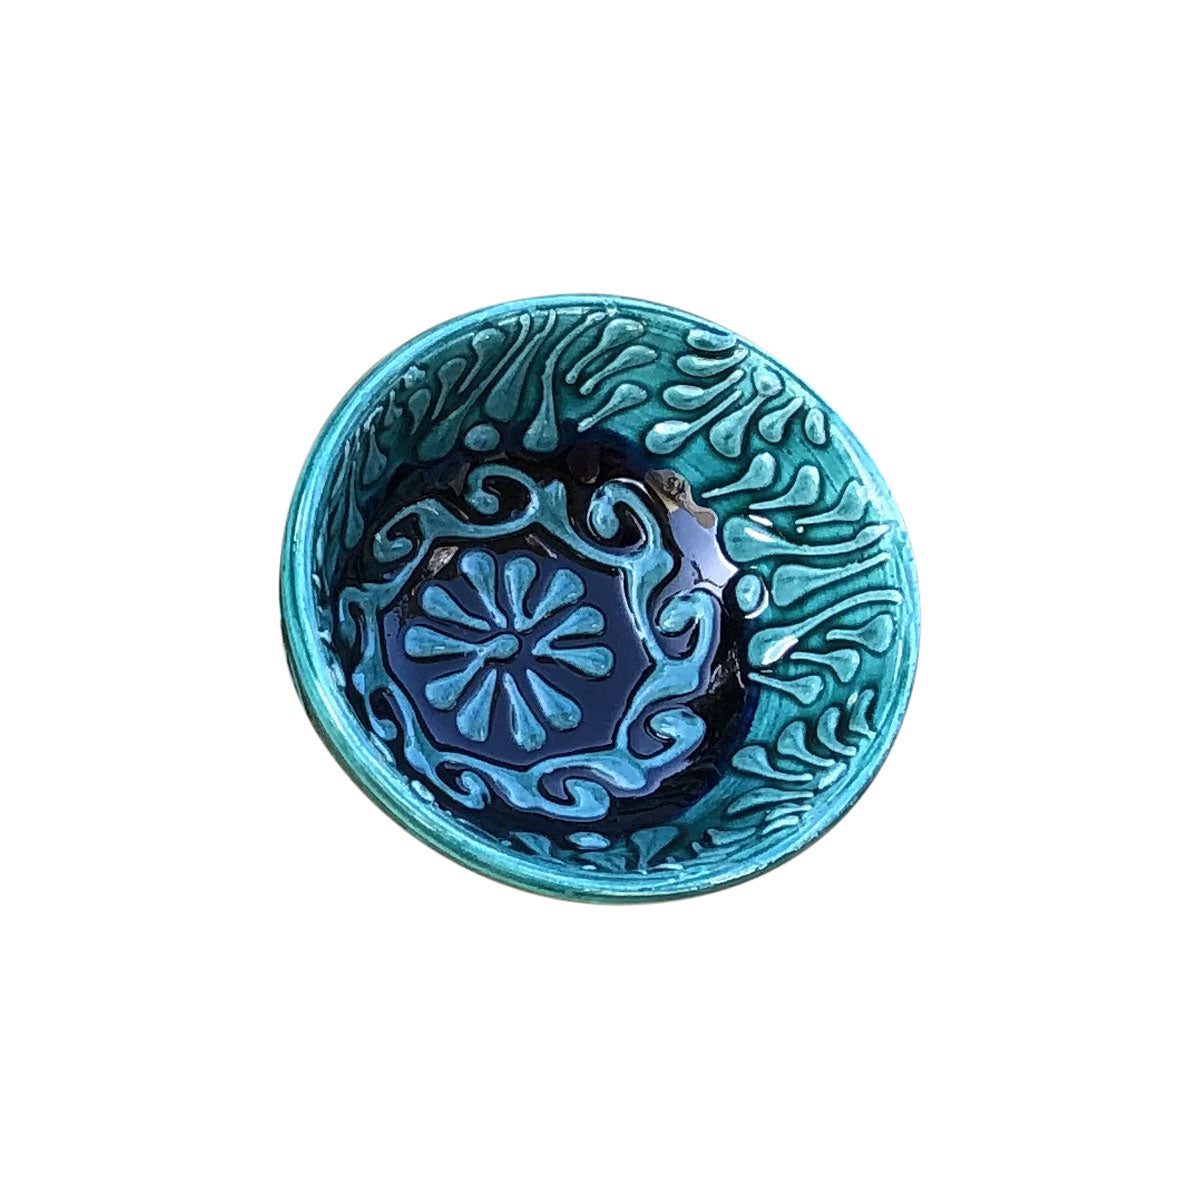 A small blue and black handmade Turkish bowl with a patterned design.